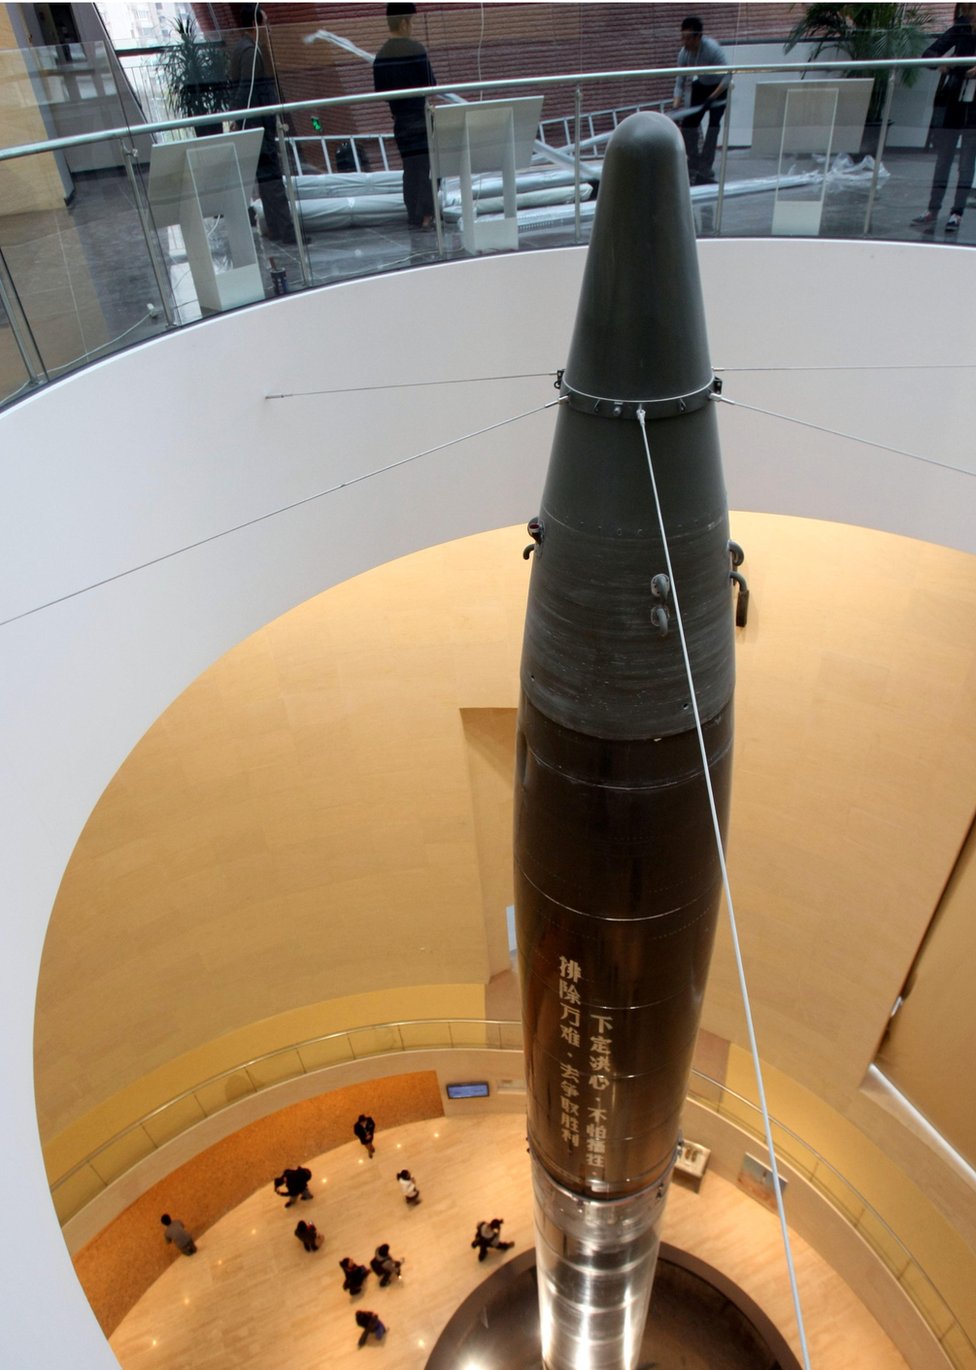 A missile at the Qian Xuesen museum in Shanghai